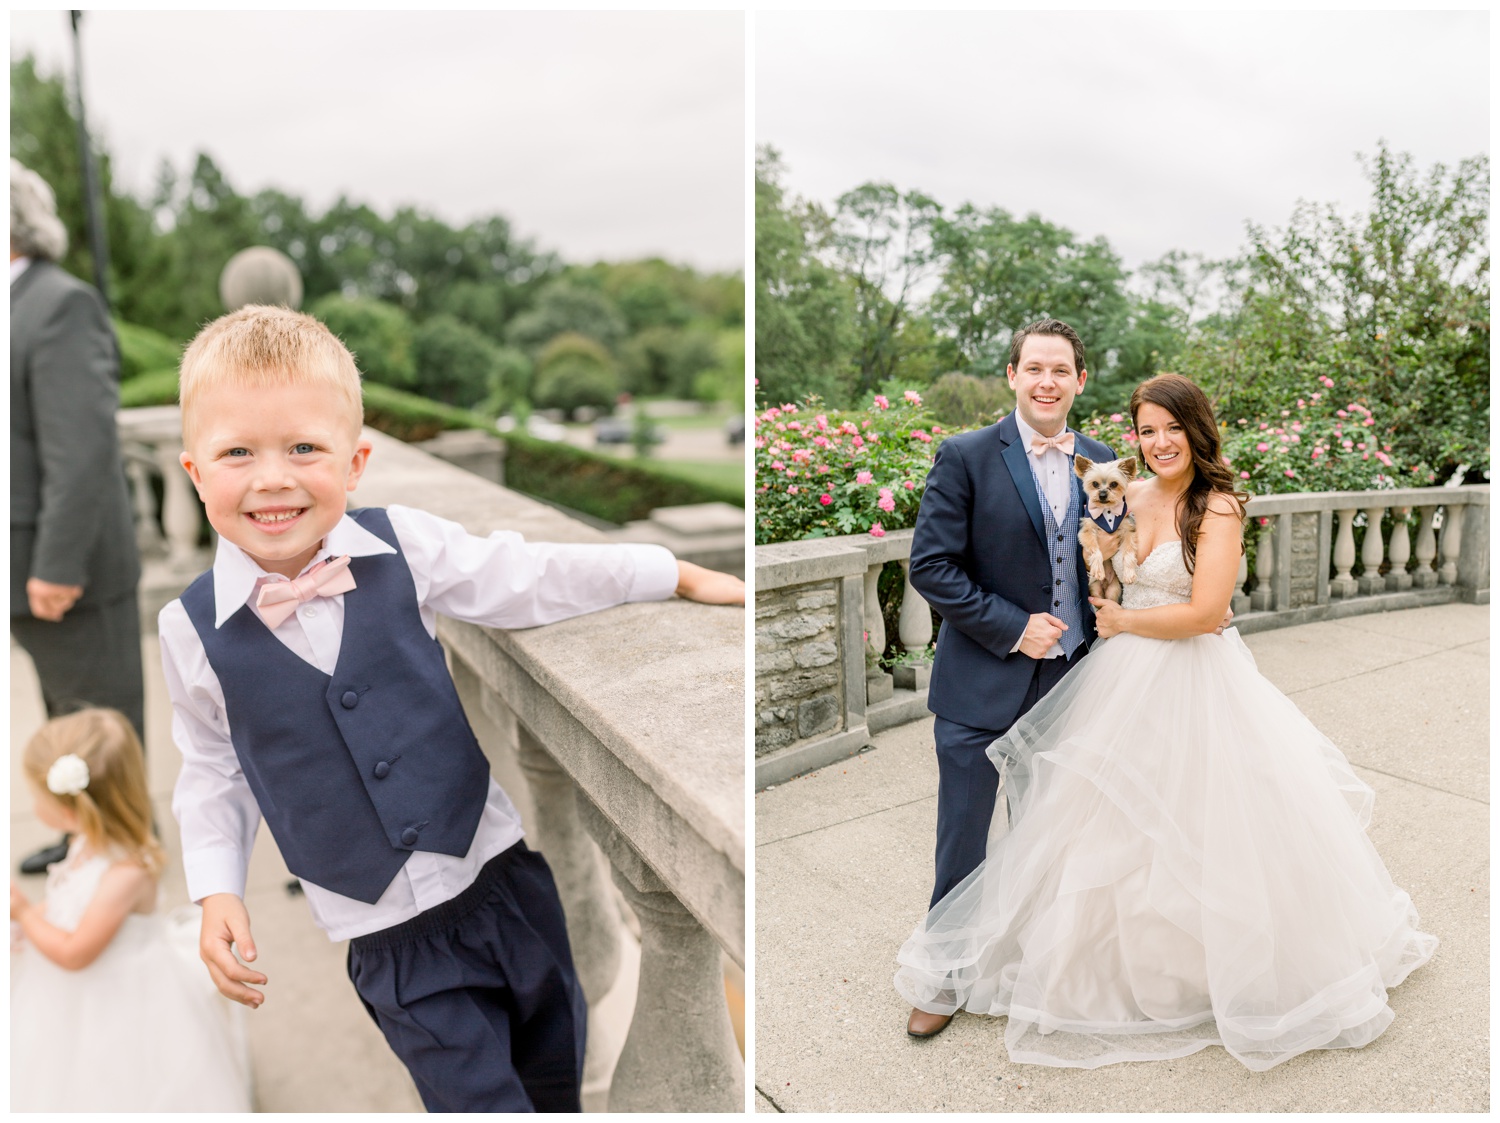 Family Wedding Portraits at Ault Park